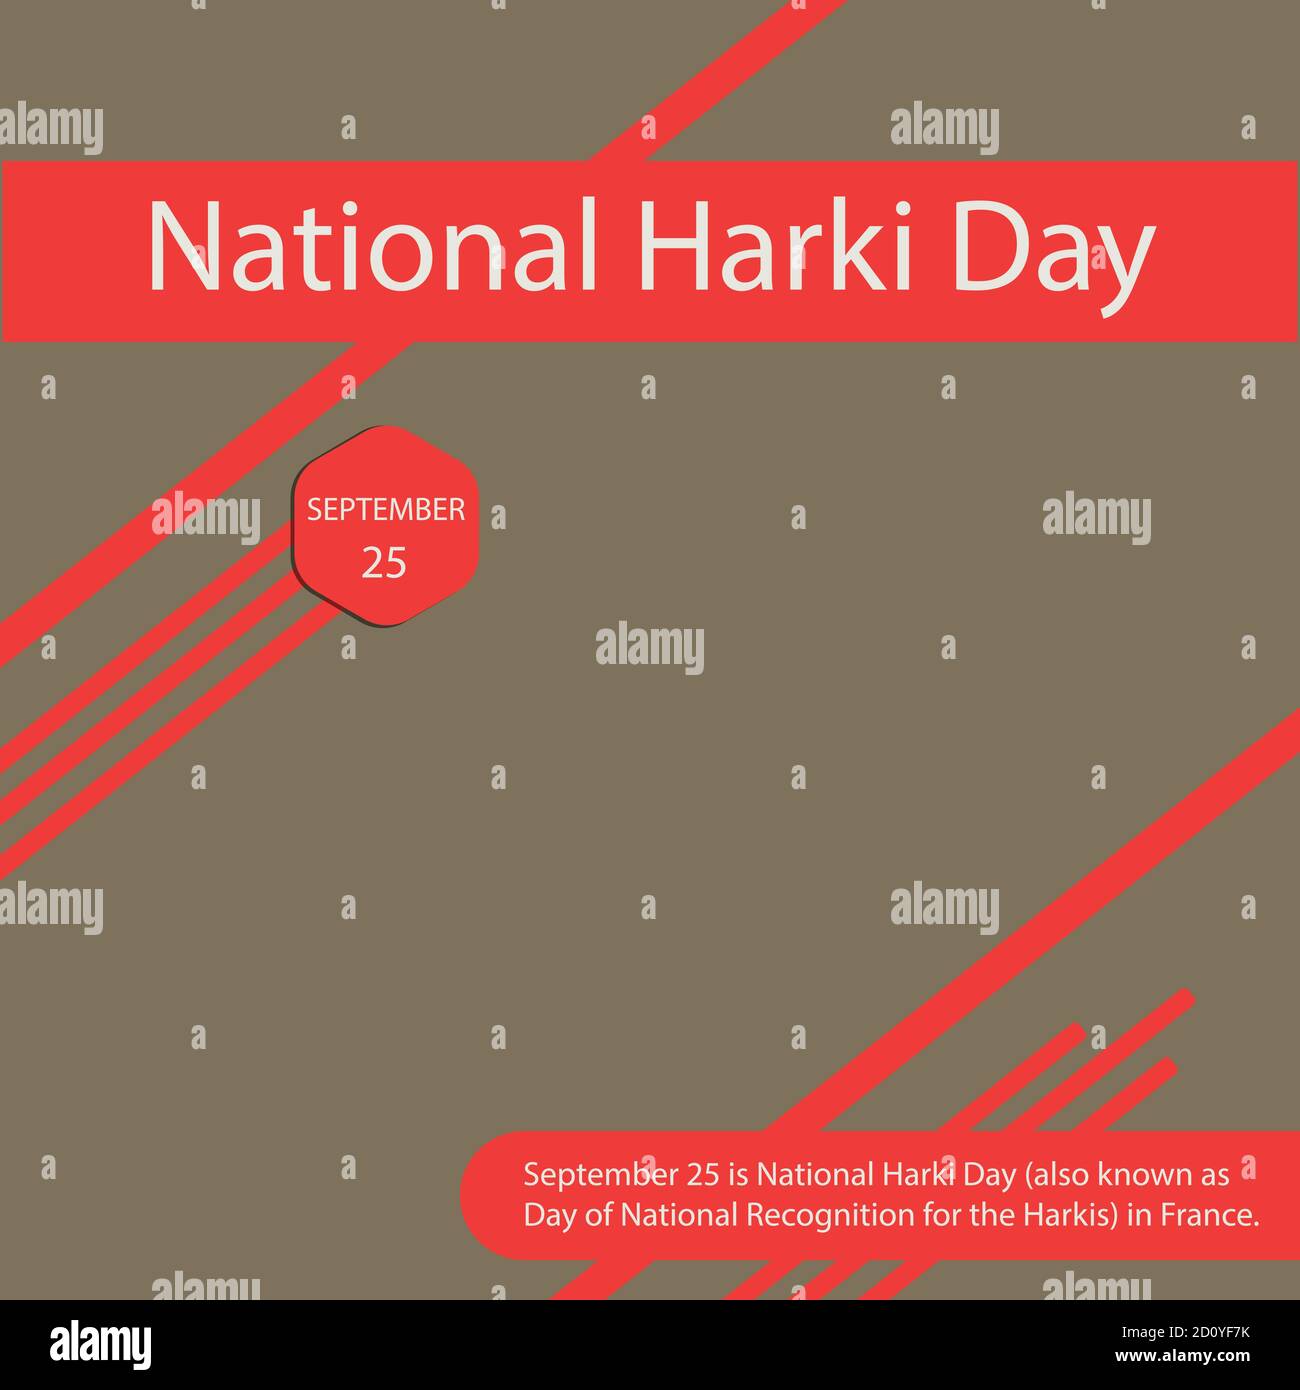 September 25 is National Harki Day, also known as Day of National Recognition for the Harkis in France. Stock Vector